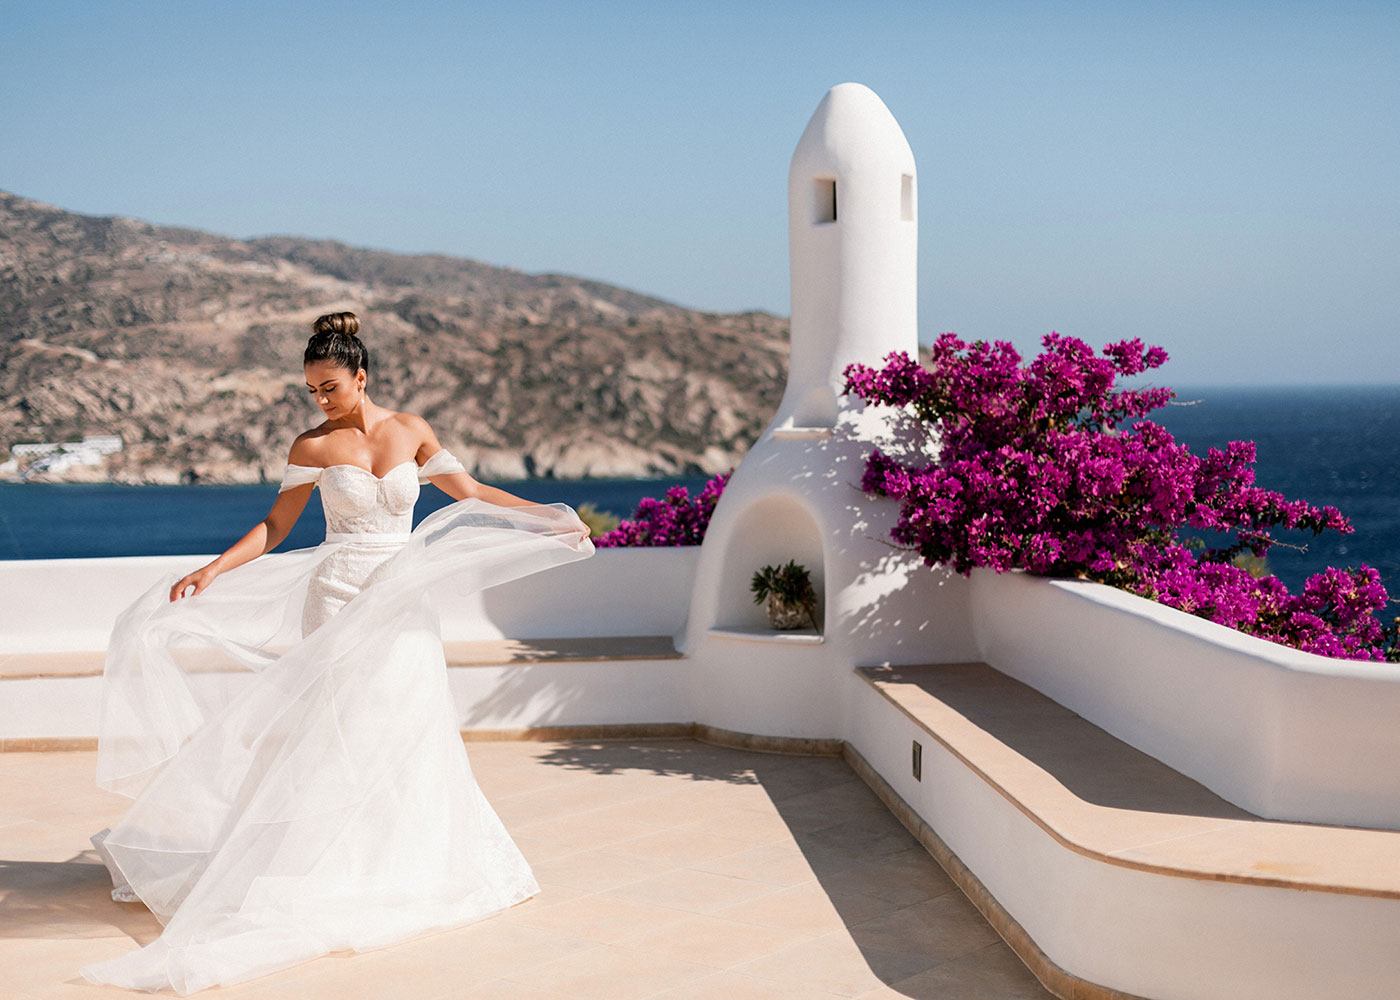 Book your wedding day in Blue Pearl Villa